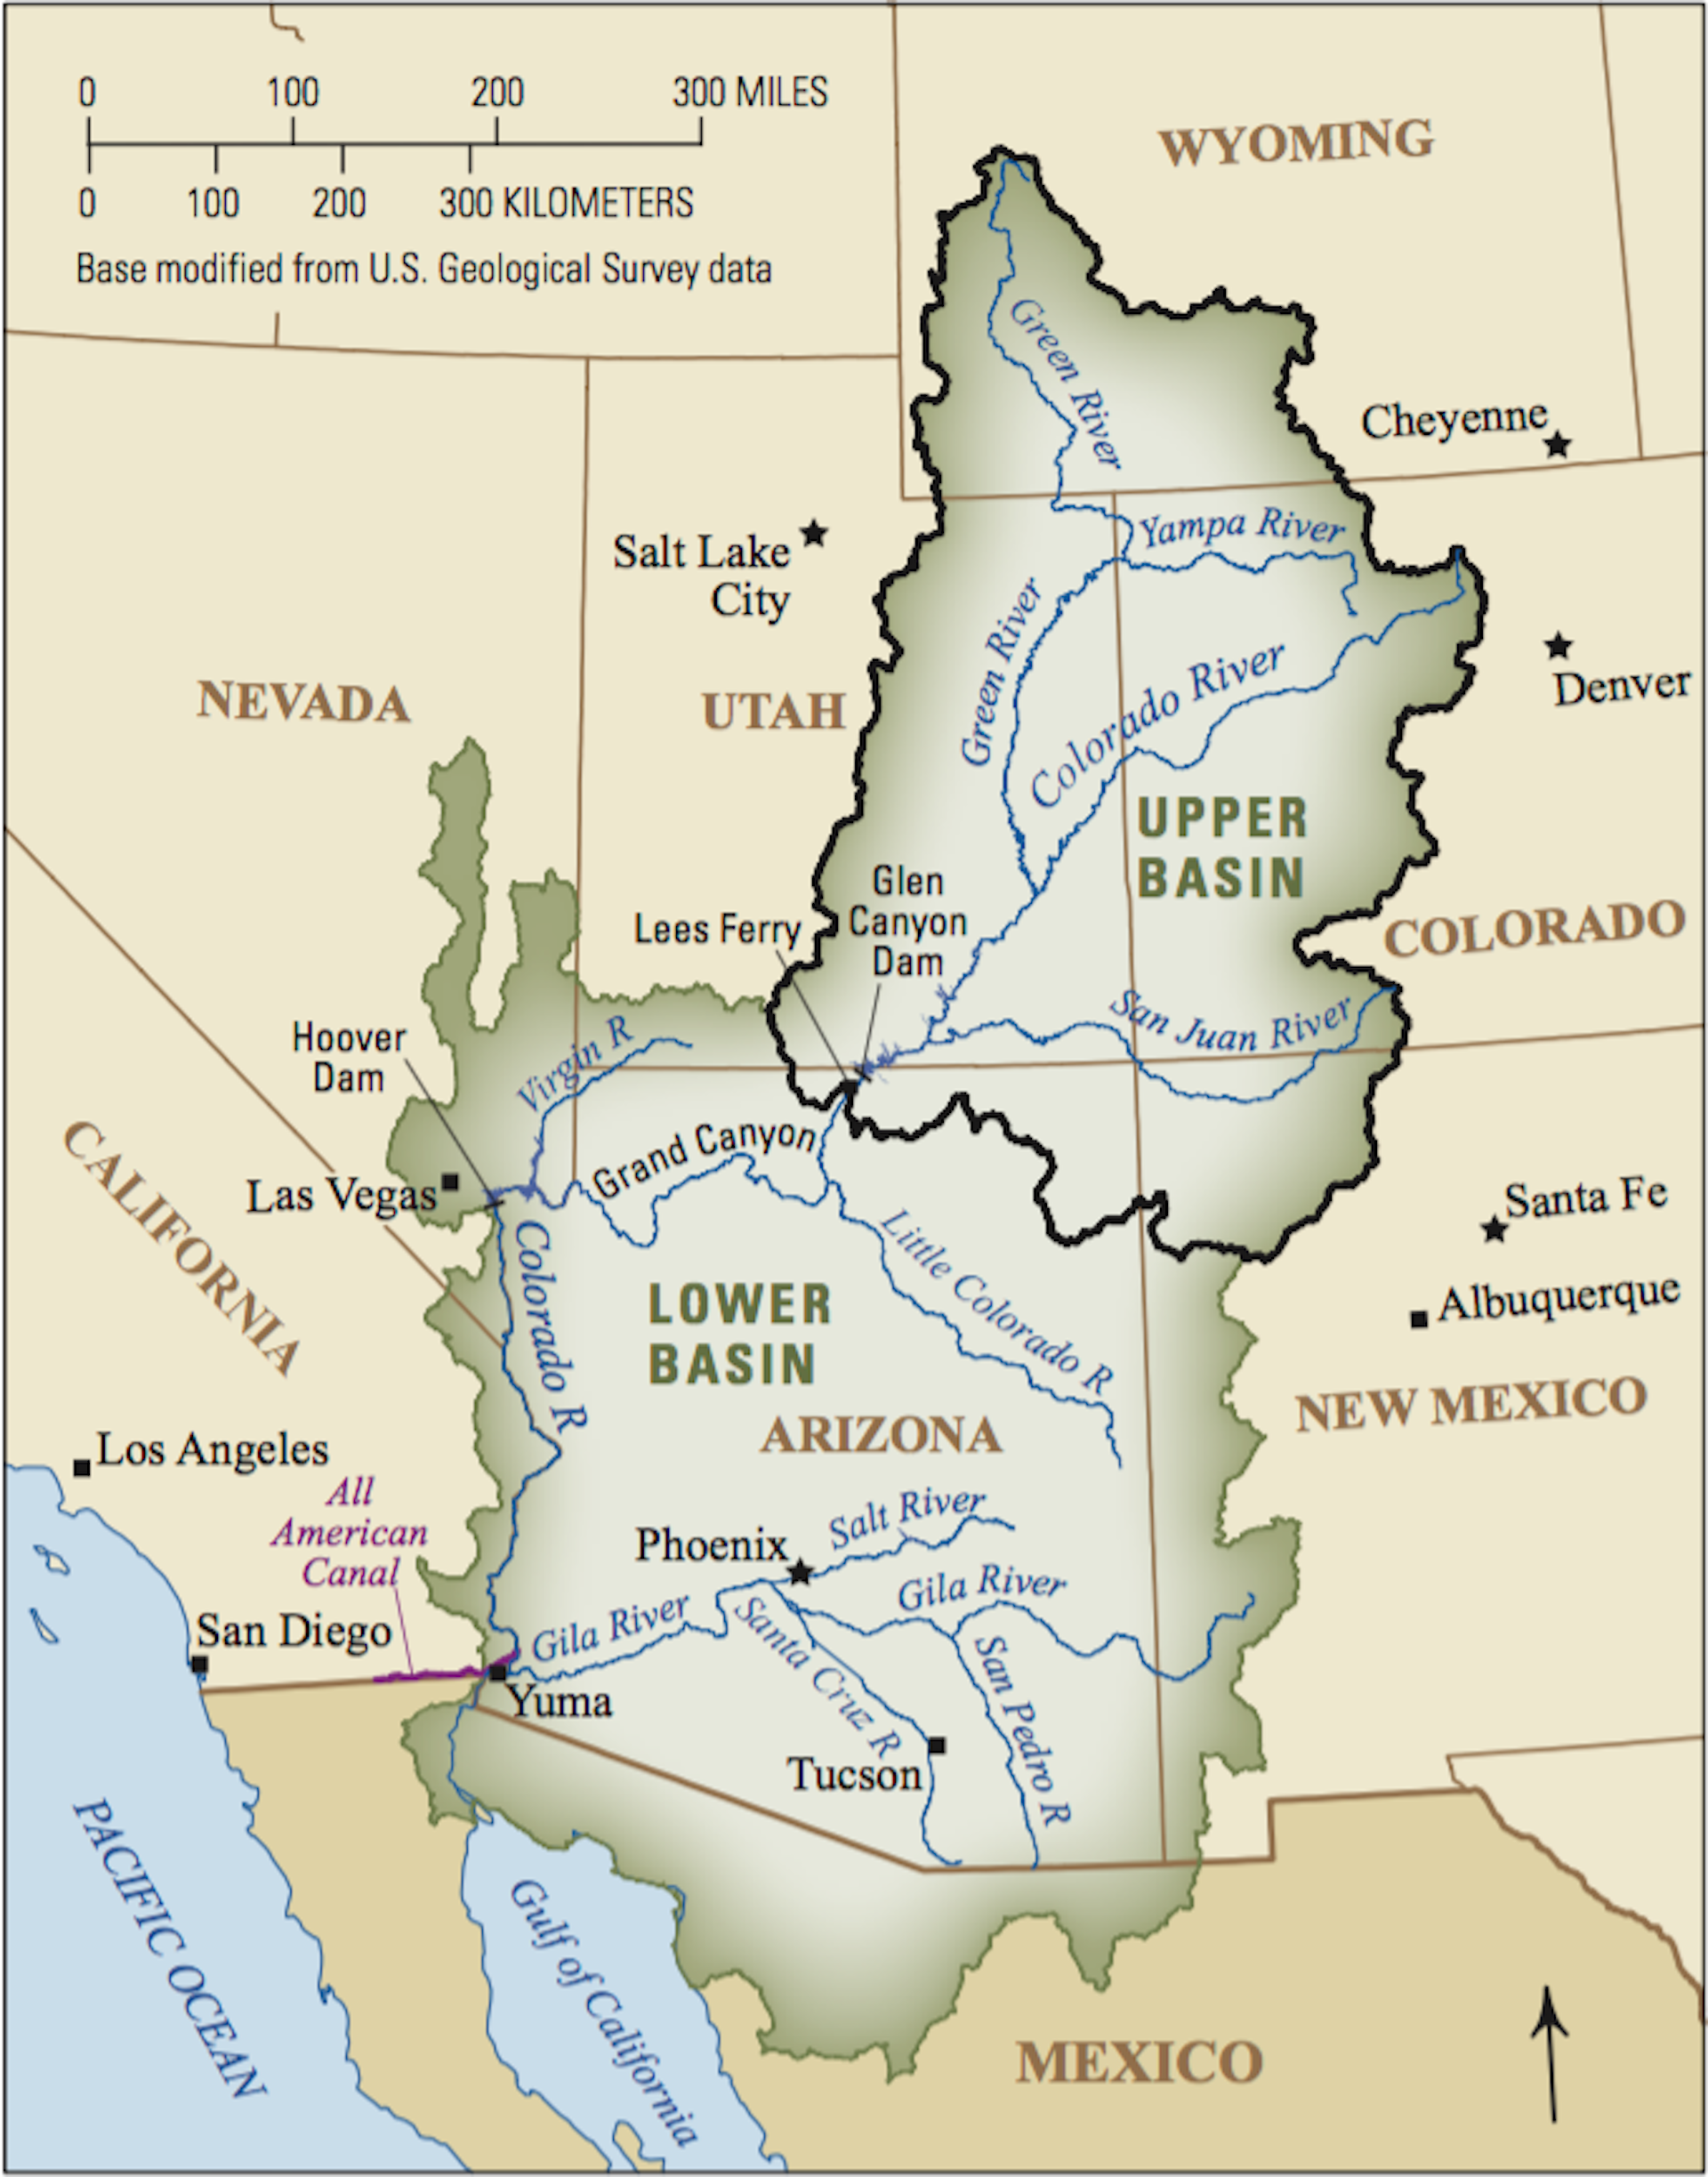 Map of Colorado River Basin and western states